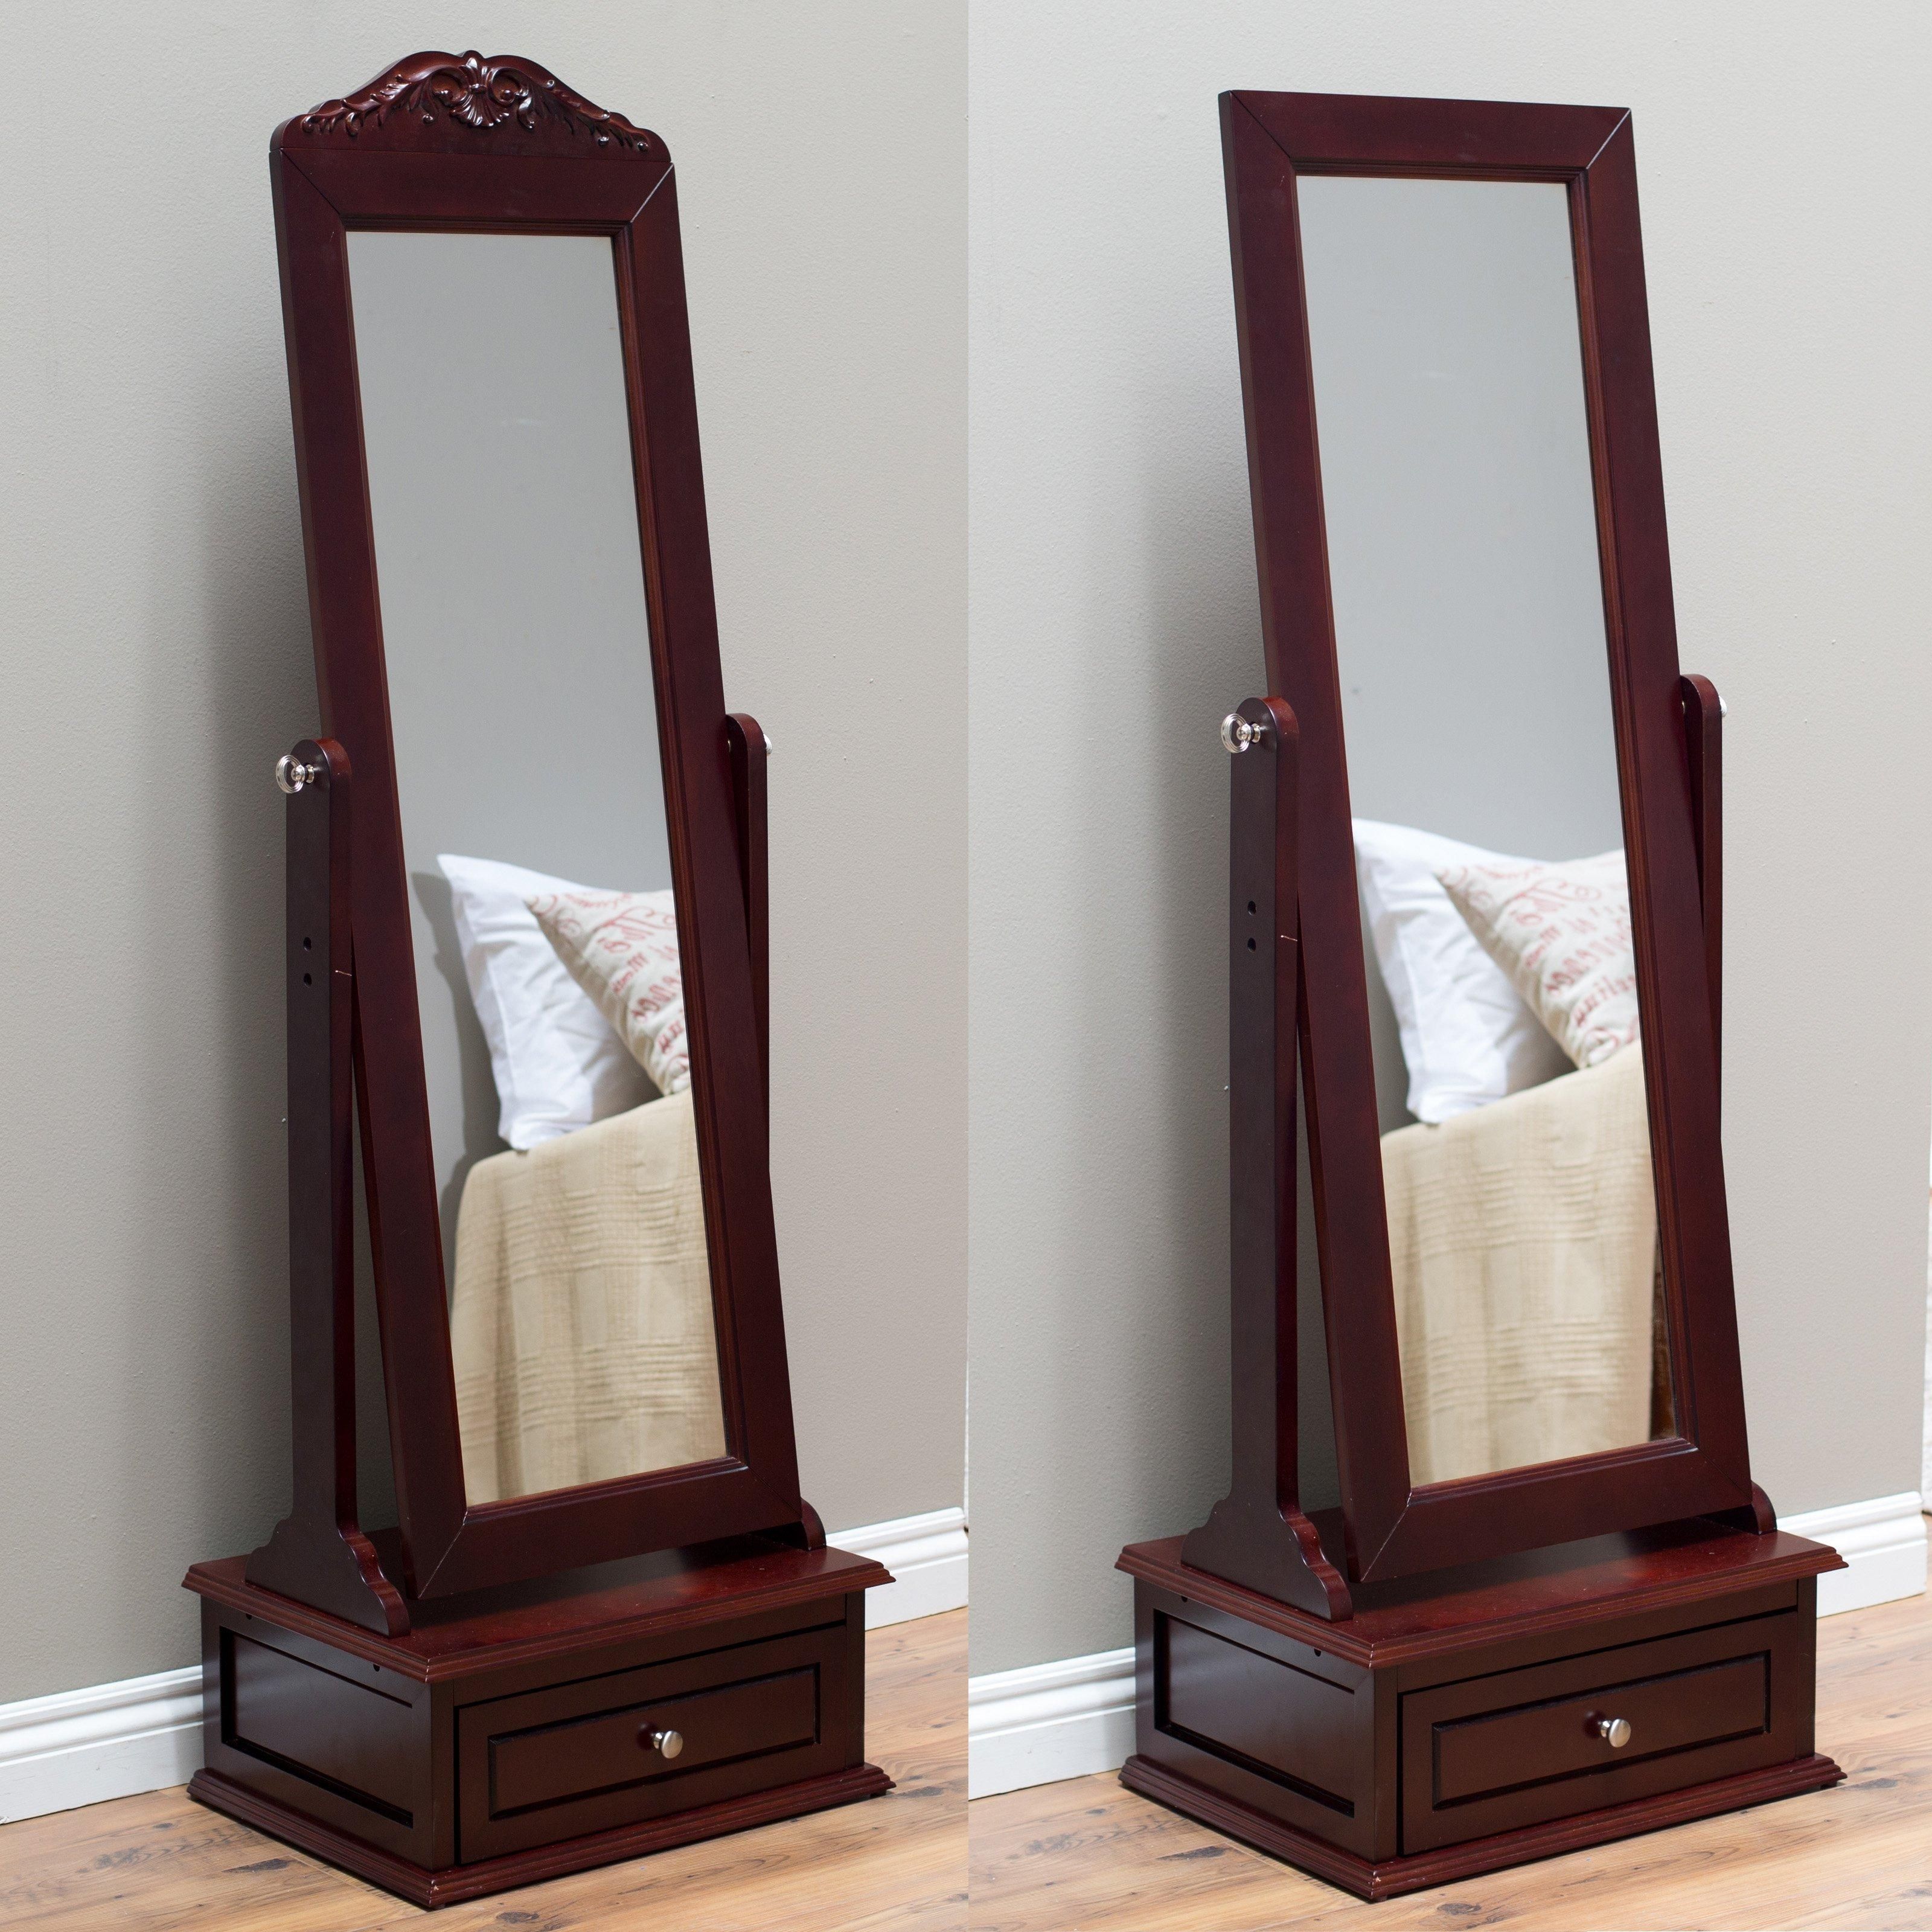 Belham Living Removable Decorative Top Cheval Mirror – Cherry For Modern Cheval Mirror (View 14 of 20)